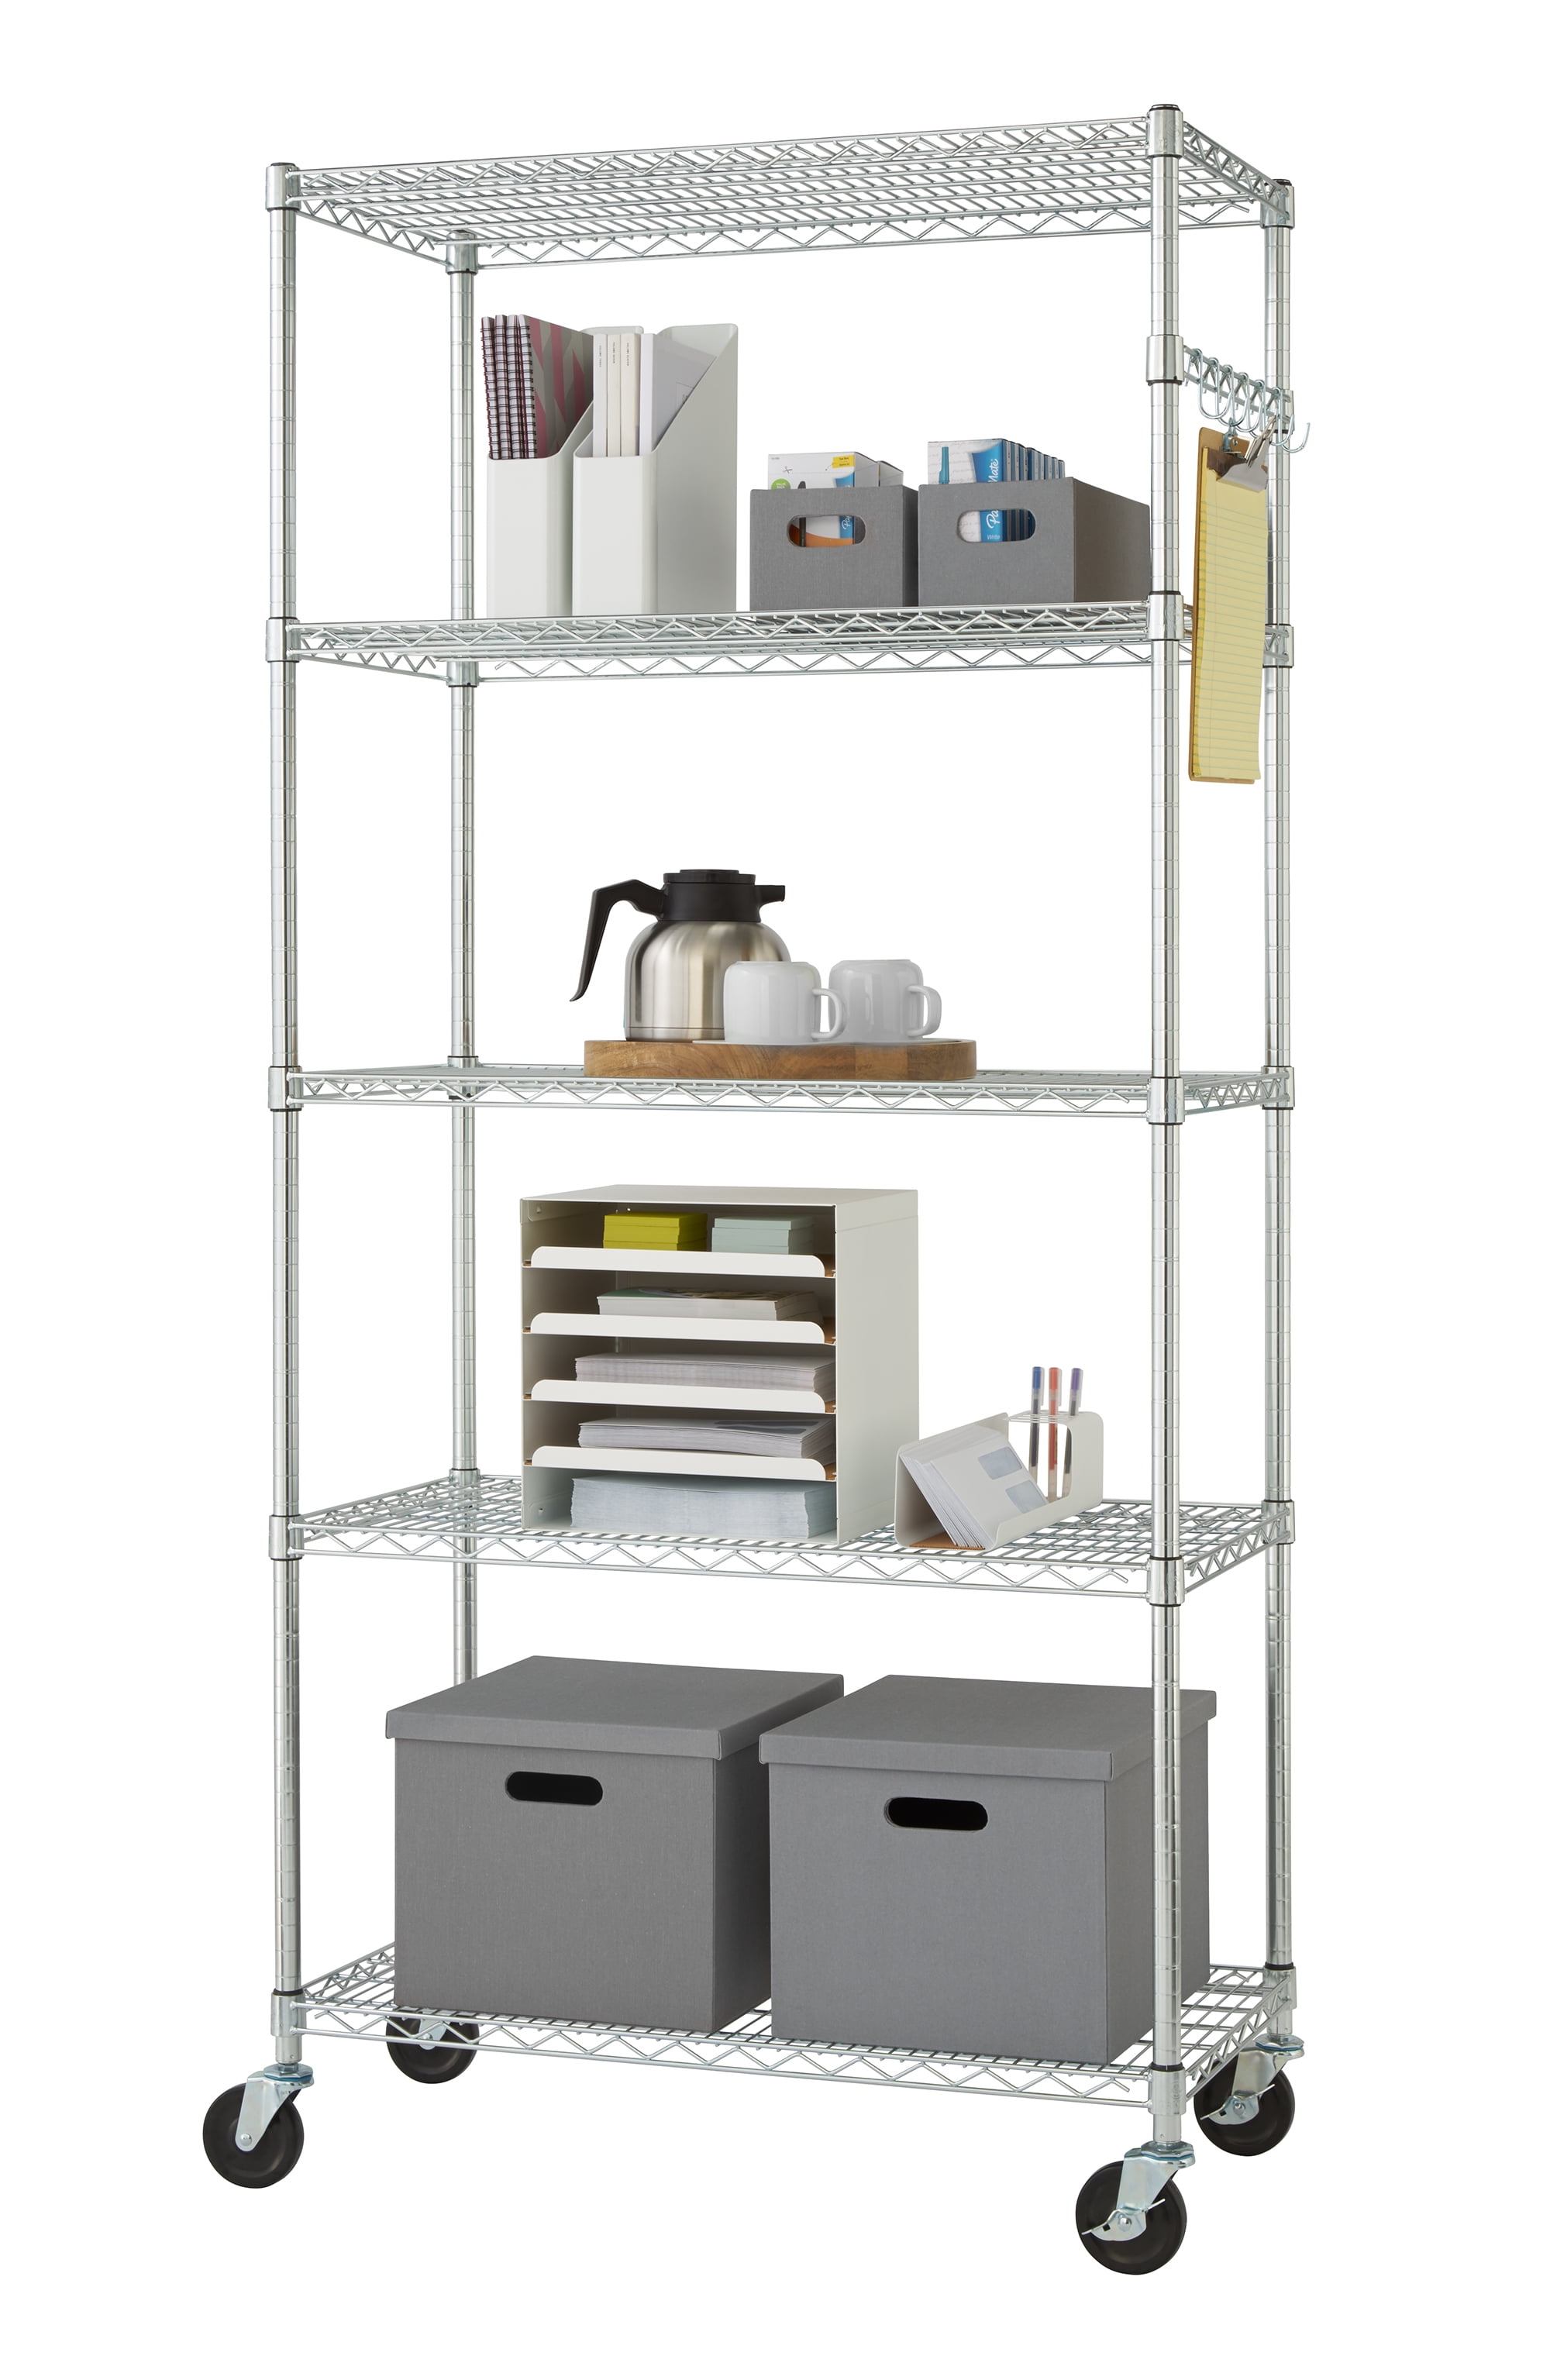 5 Tier Wire Shelving Rack With Wheels, 5 Tier Wire Shelving Rack With Wheels 36 X 18 72